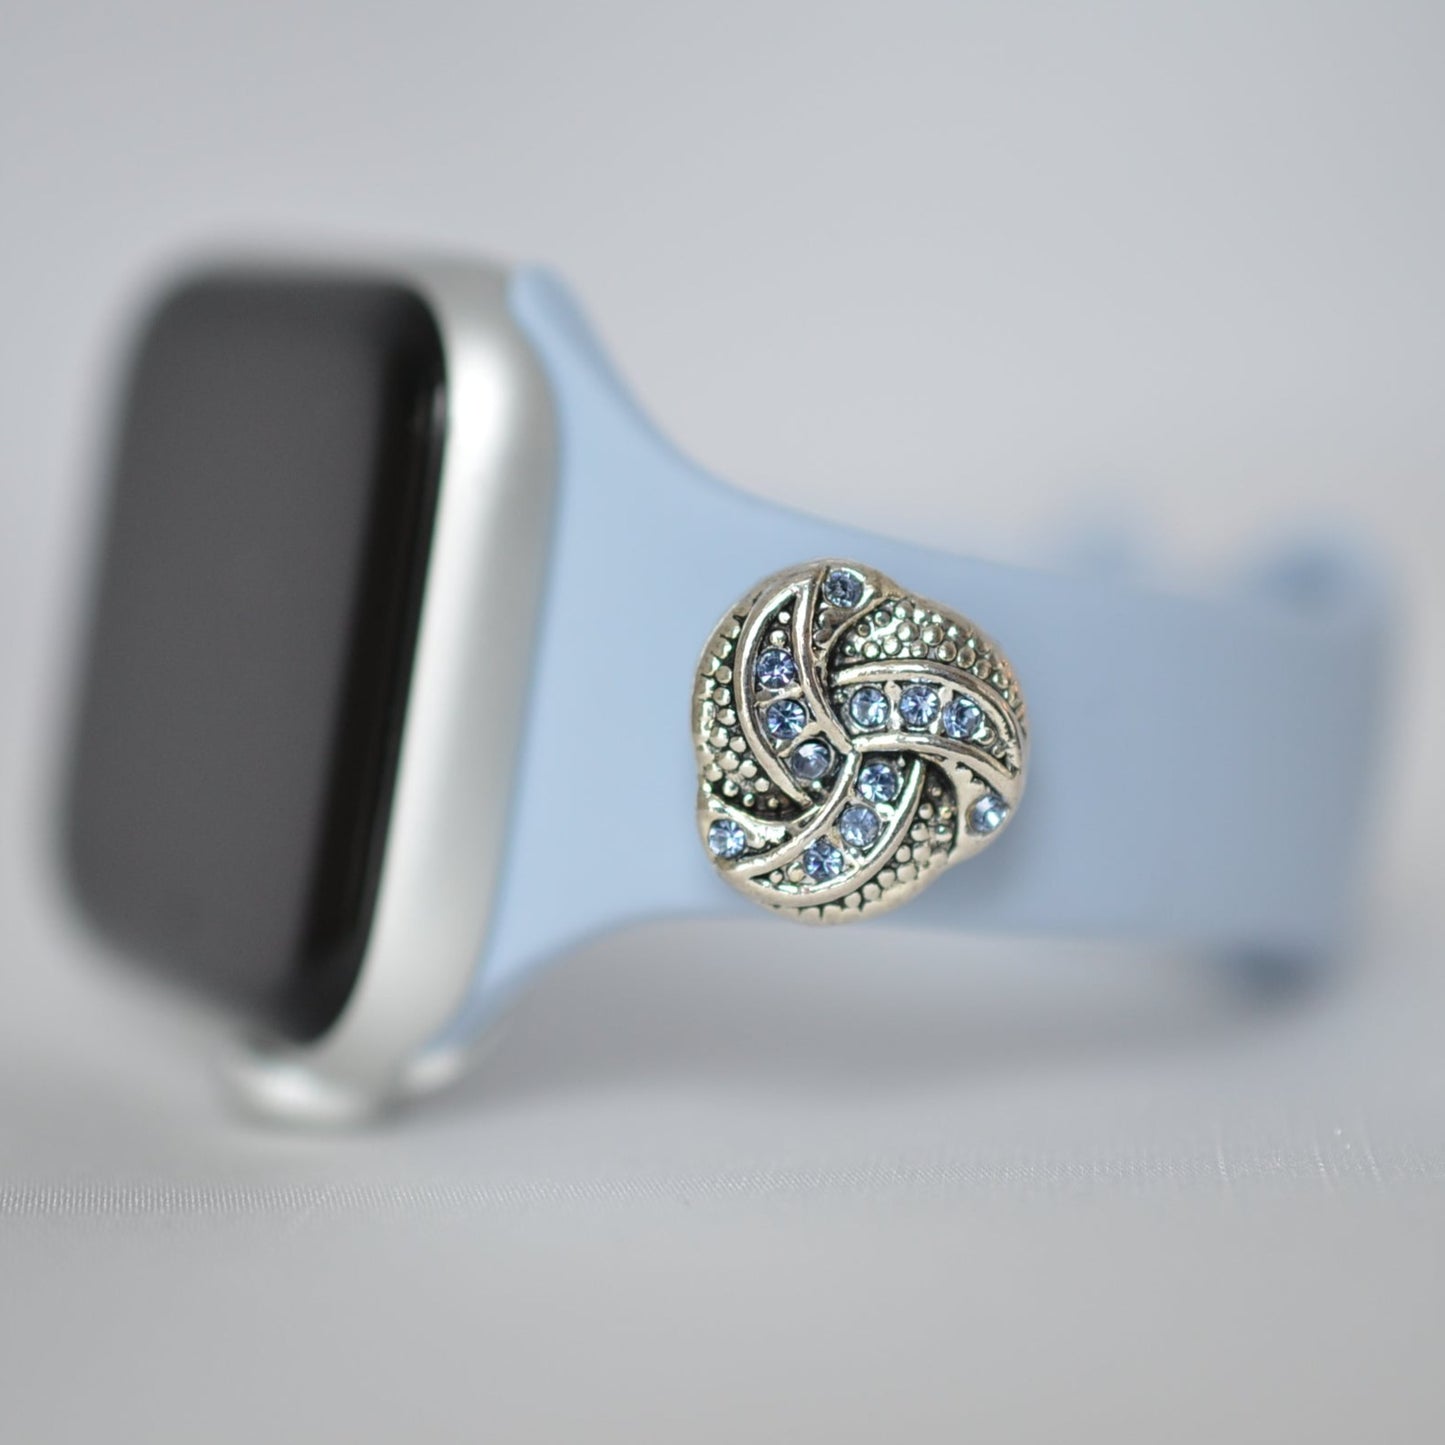 Light Blue Apple Watch Band with Charm 